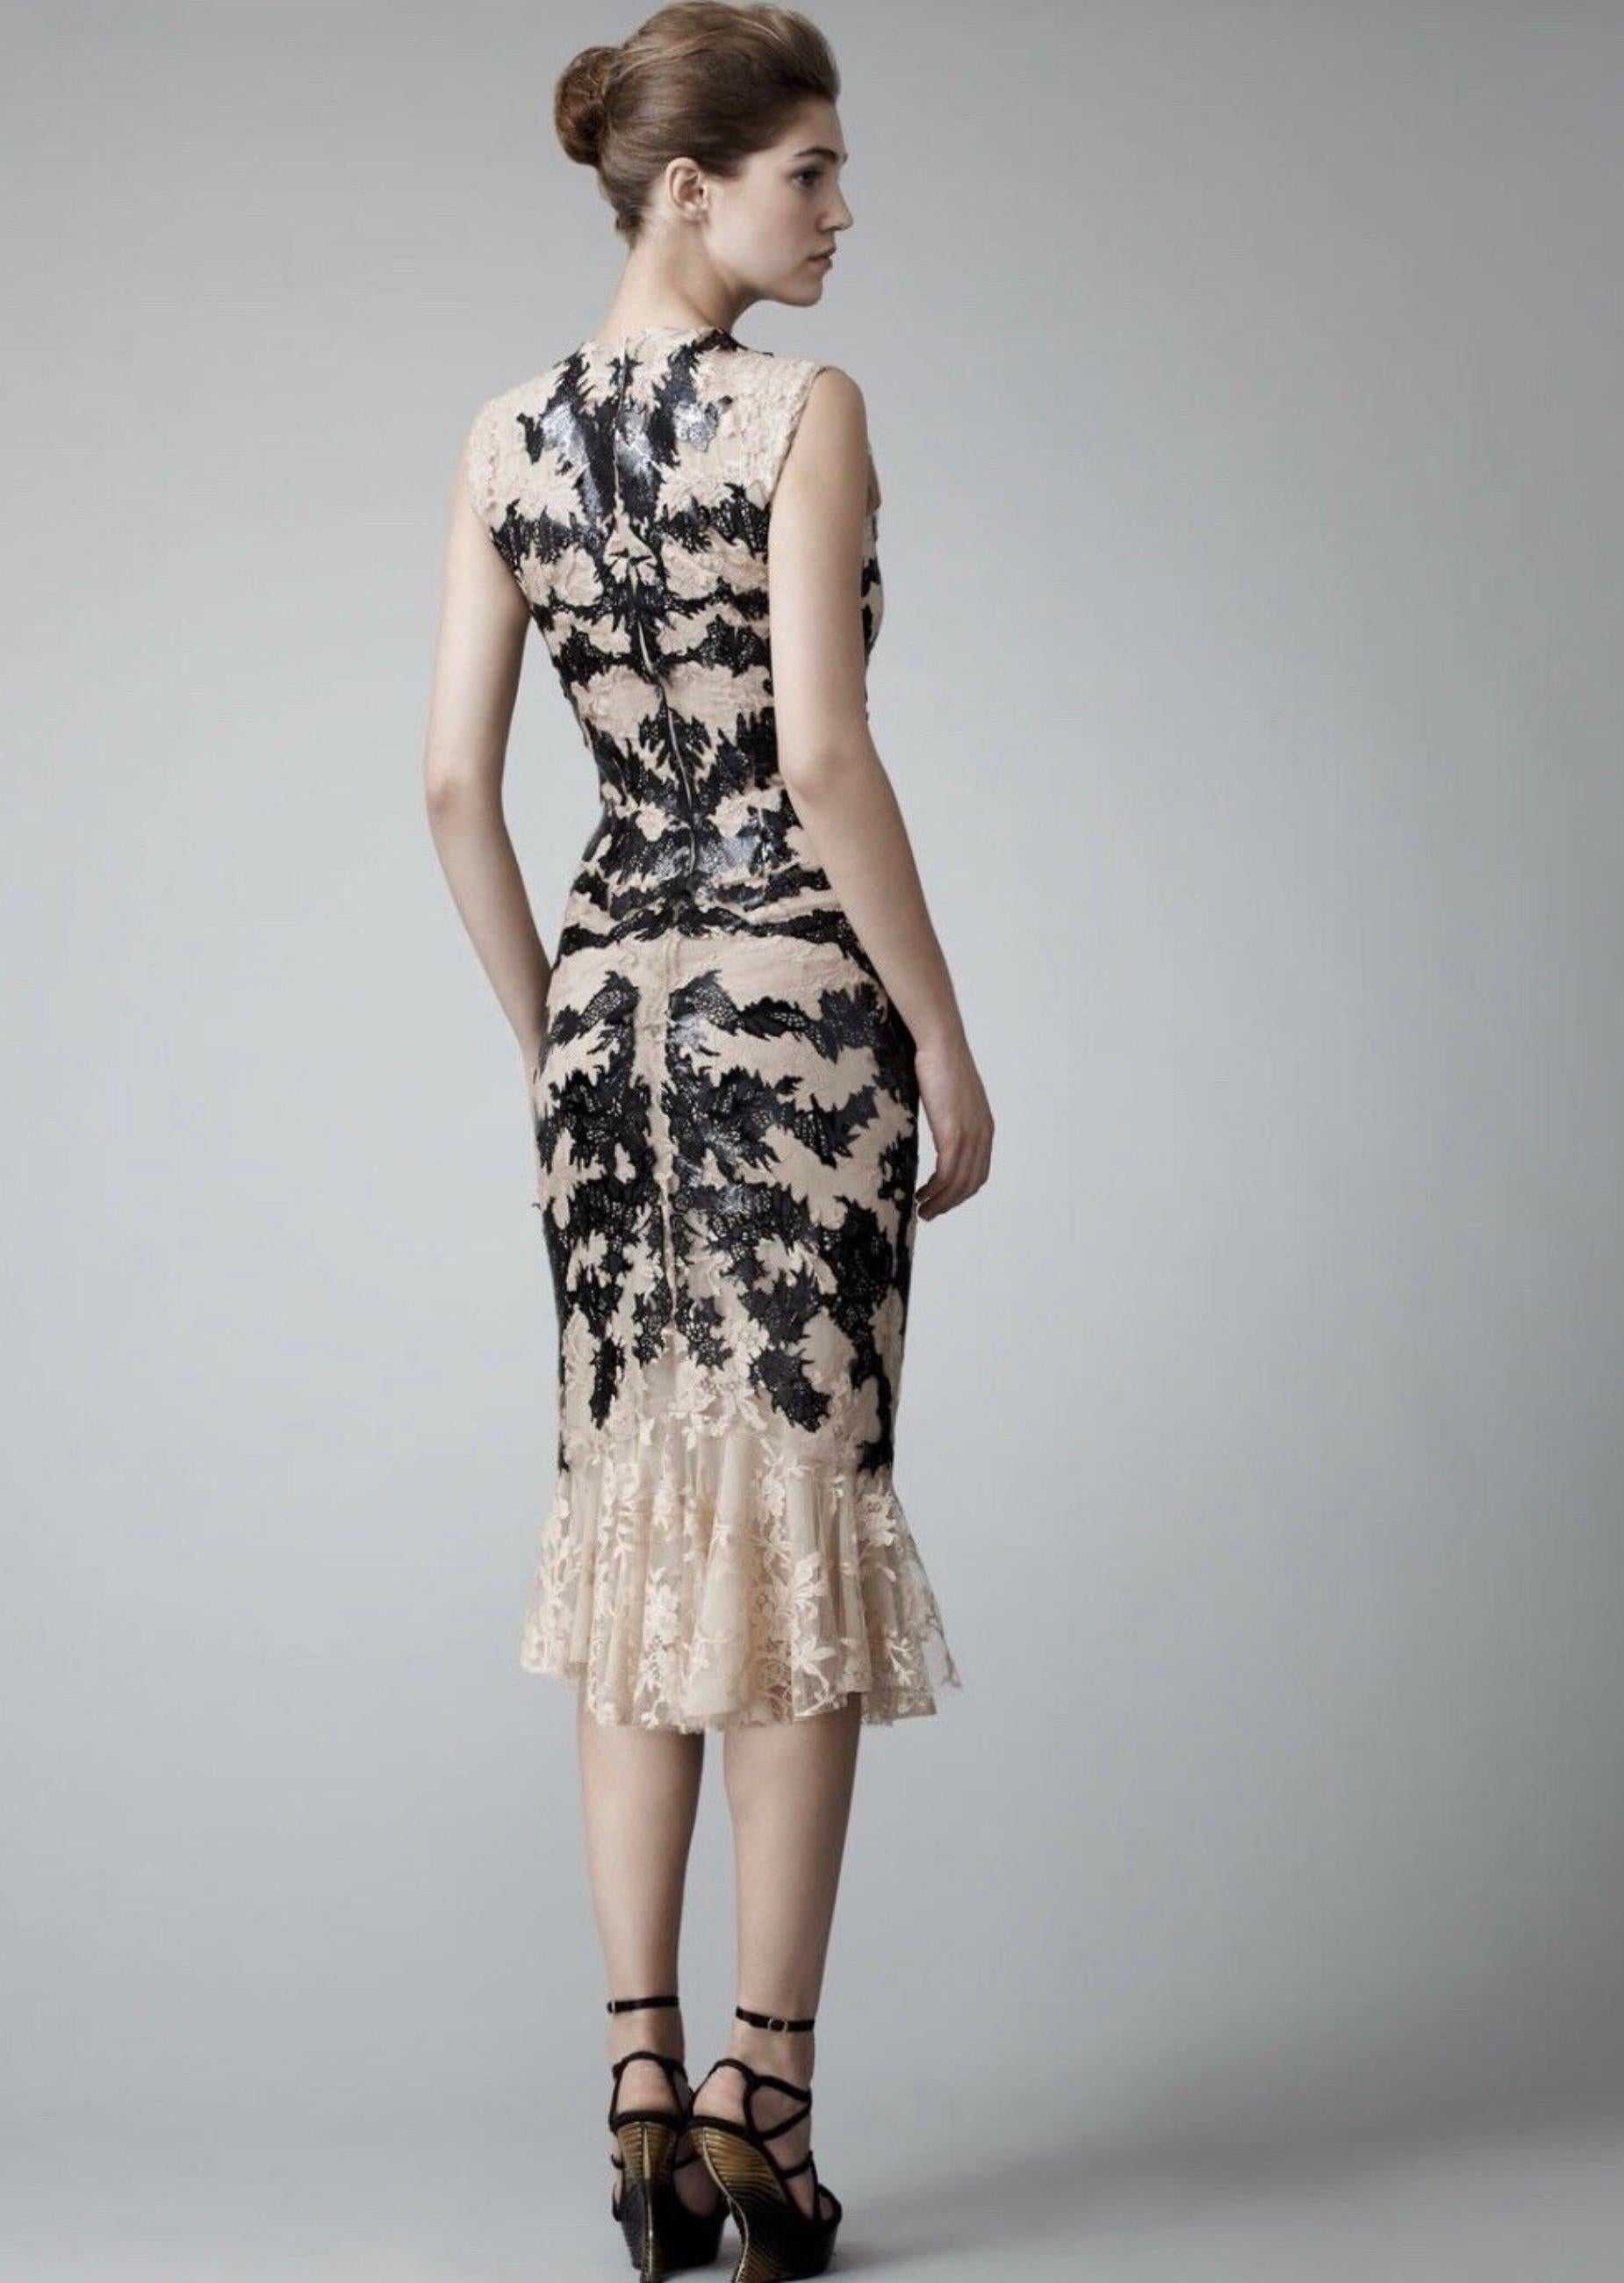 Iconic Archival Alexander McQueen SS 2012 Laser Cut Silk Lace Dress For Sale 7